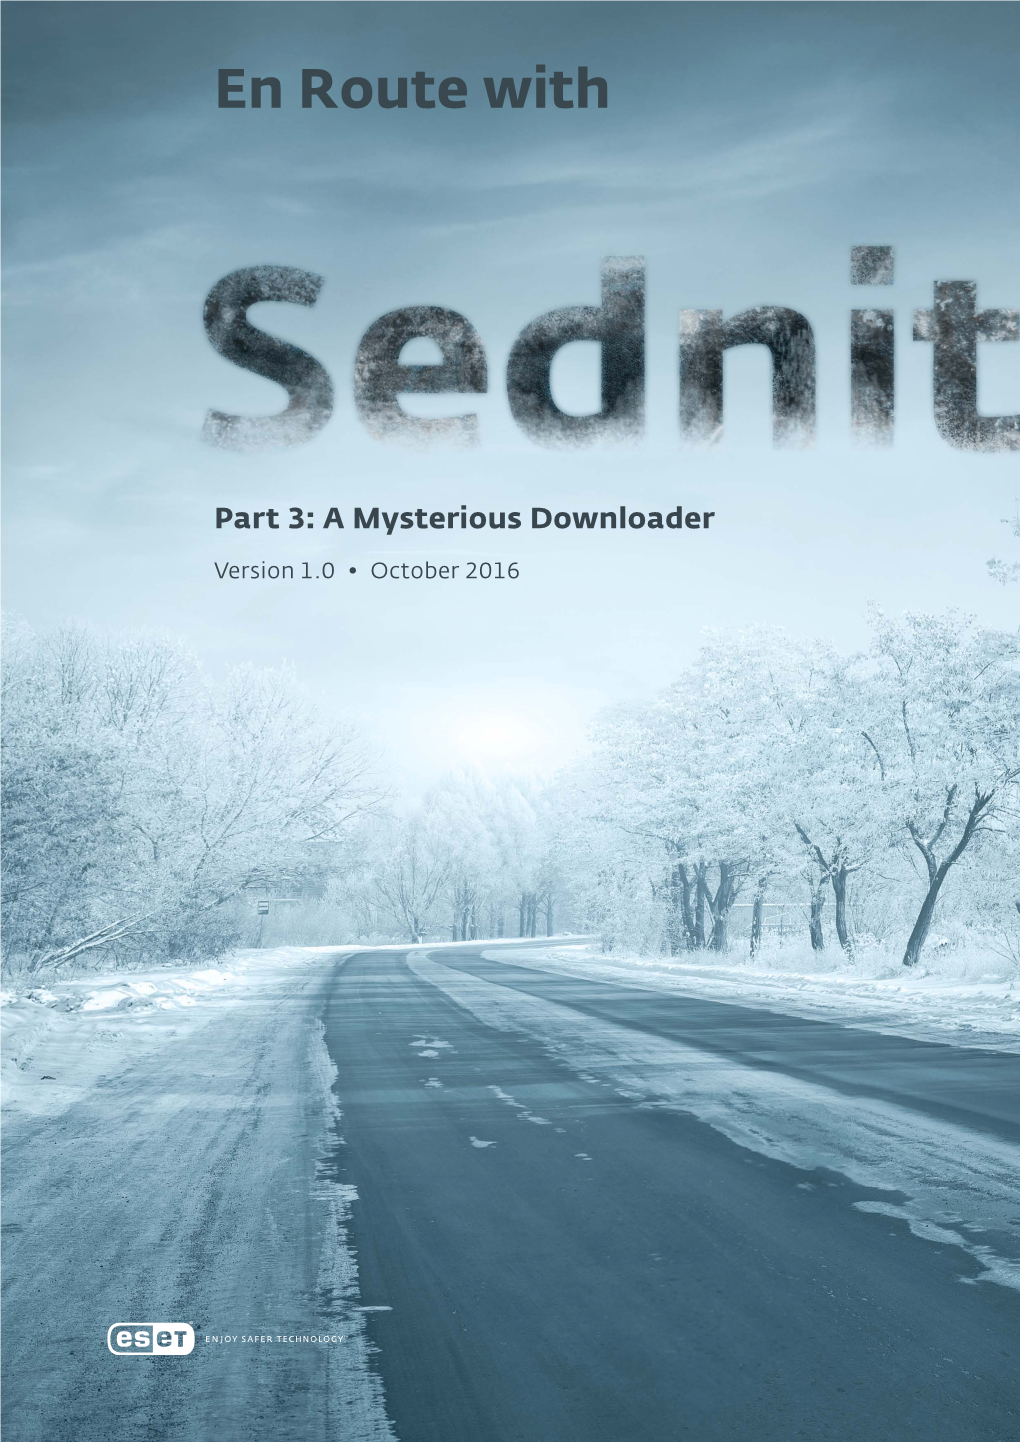 En Route with Sednit Part 3: a Mysterious Downloader